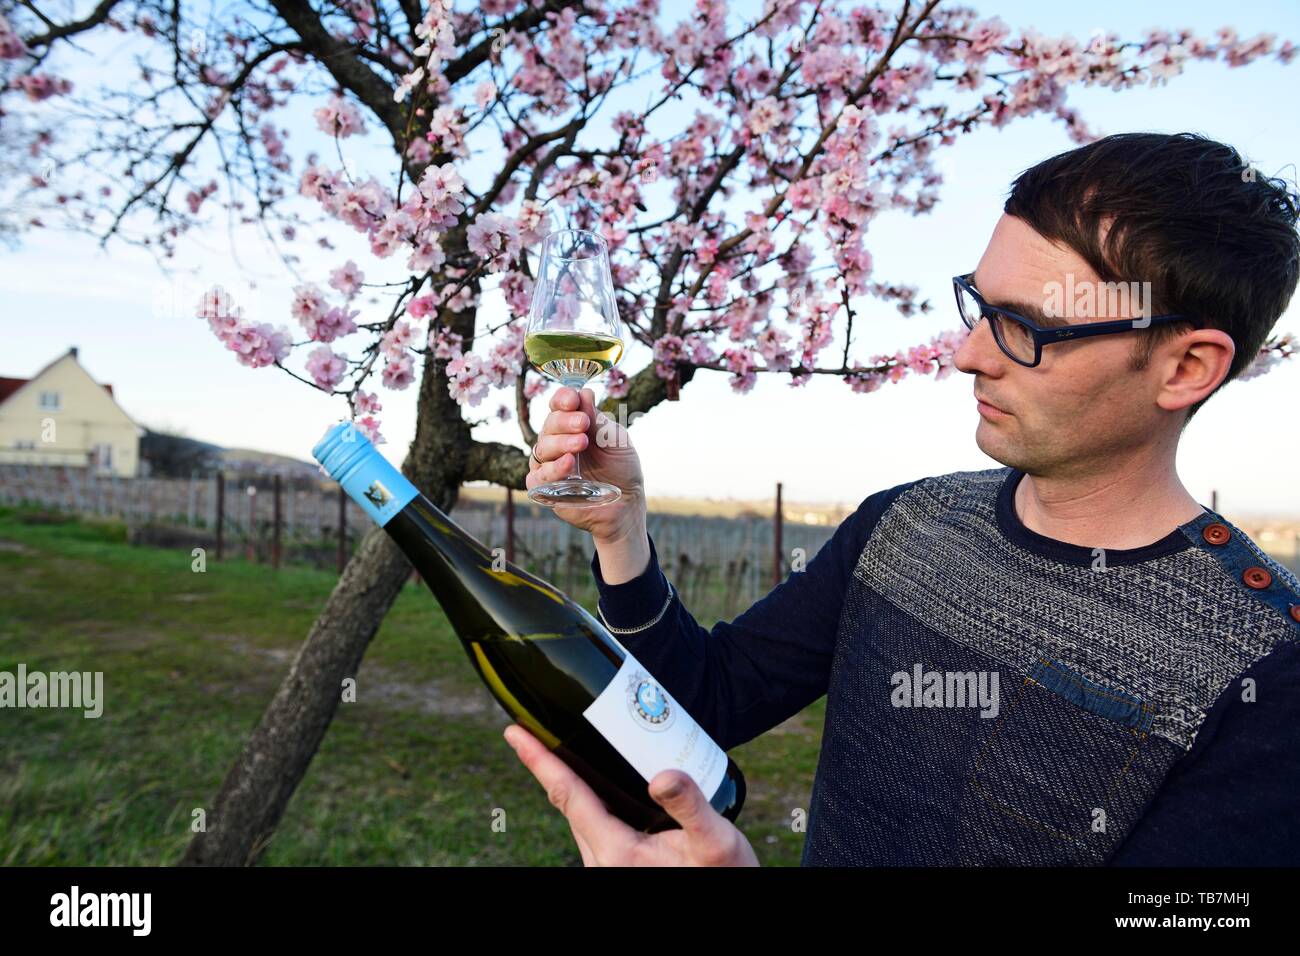 Wine connoisseur tests white wine in front of a blossoming almond tree, Burrweiler, Palatinate Almond Trail, German Wine Route, Rhineland-Palatinate Stock Photo